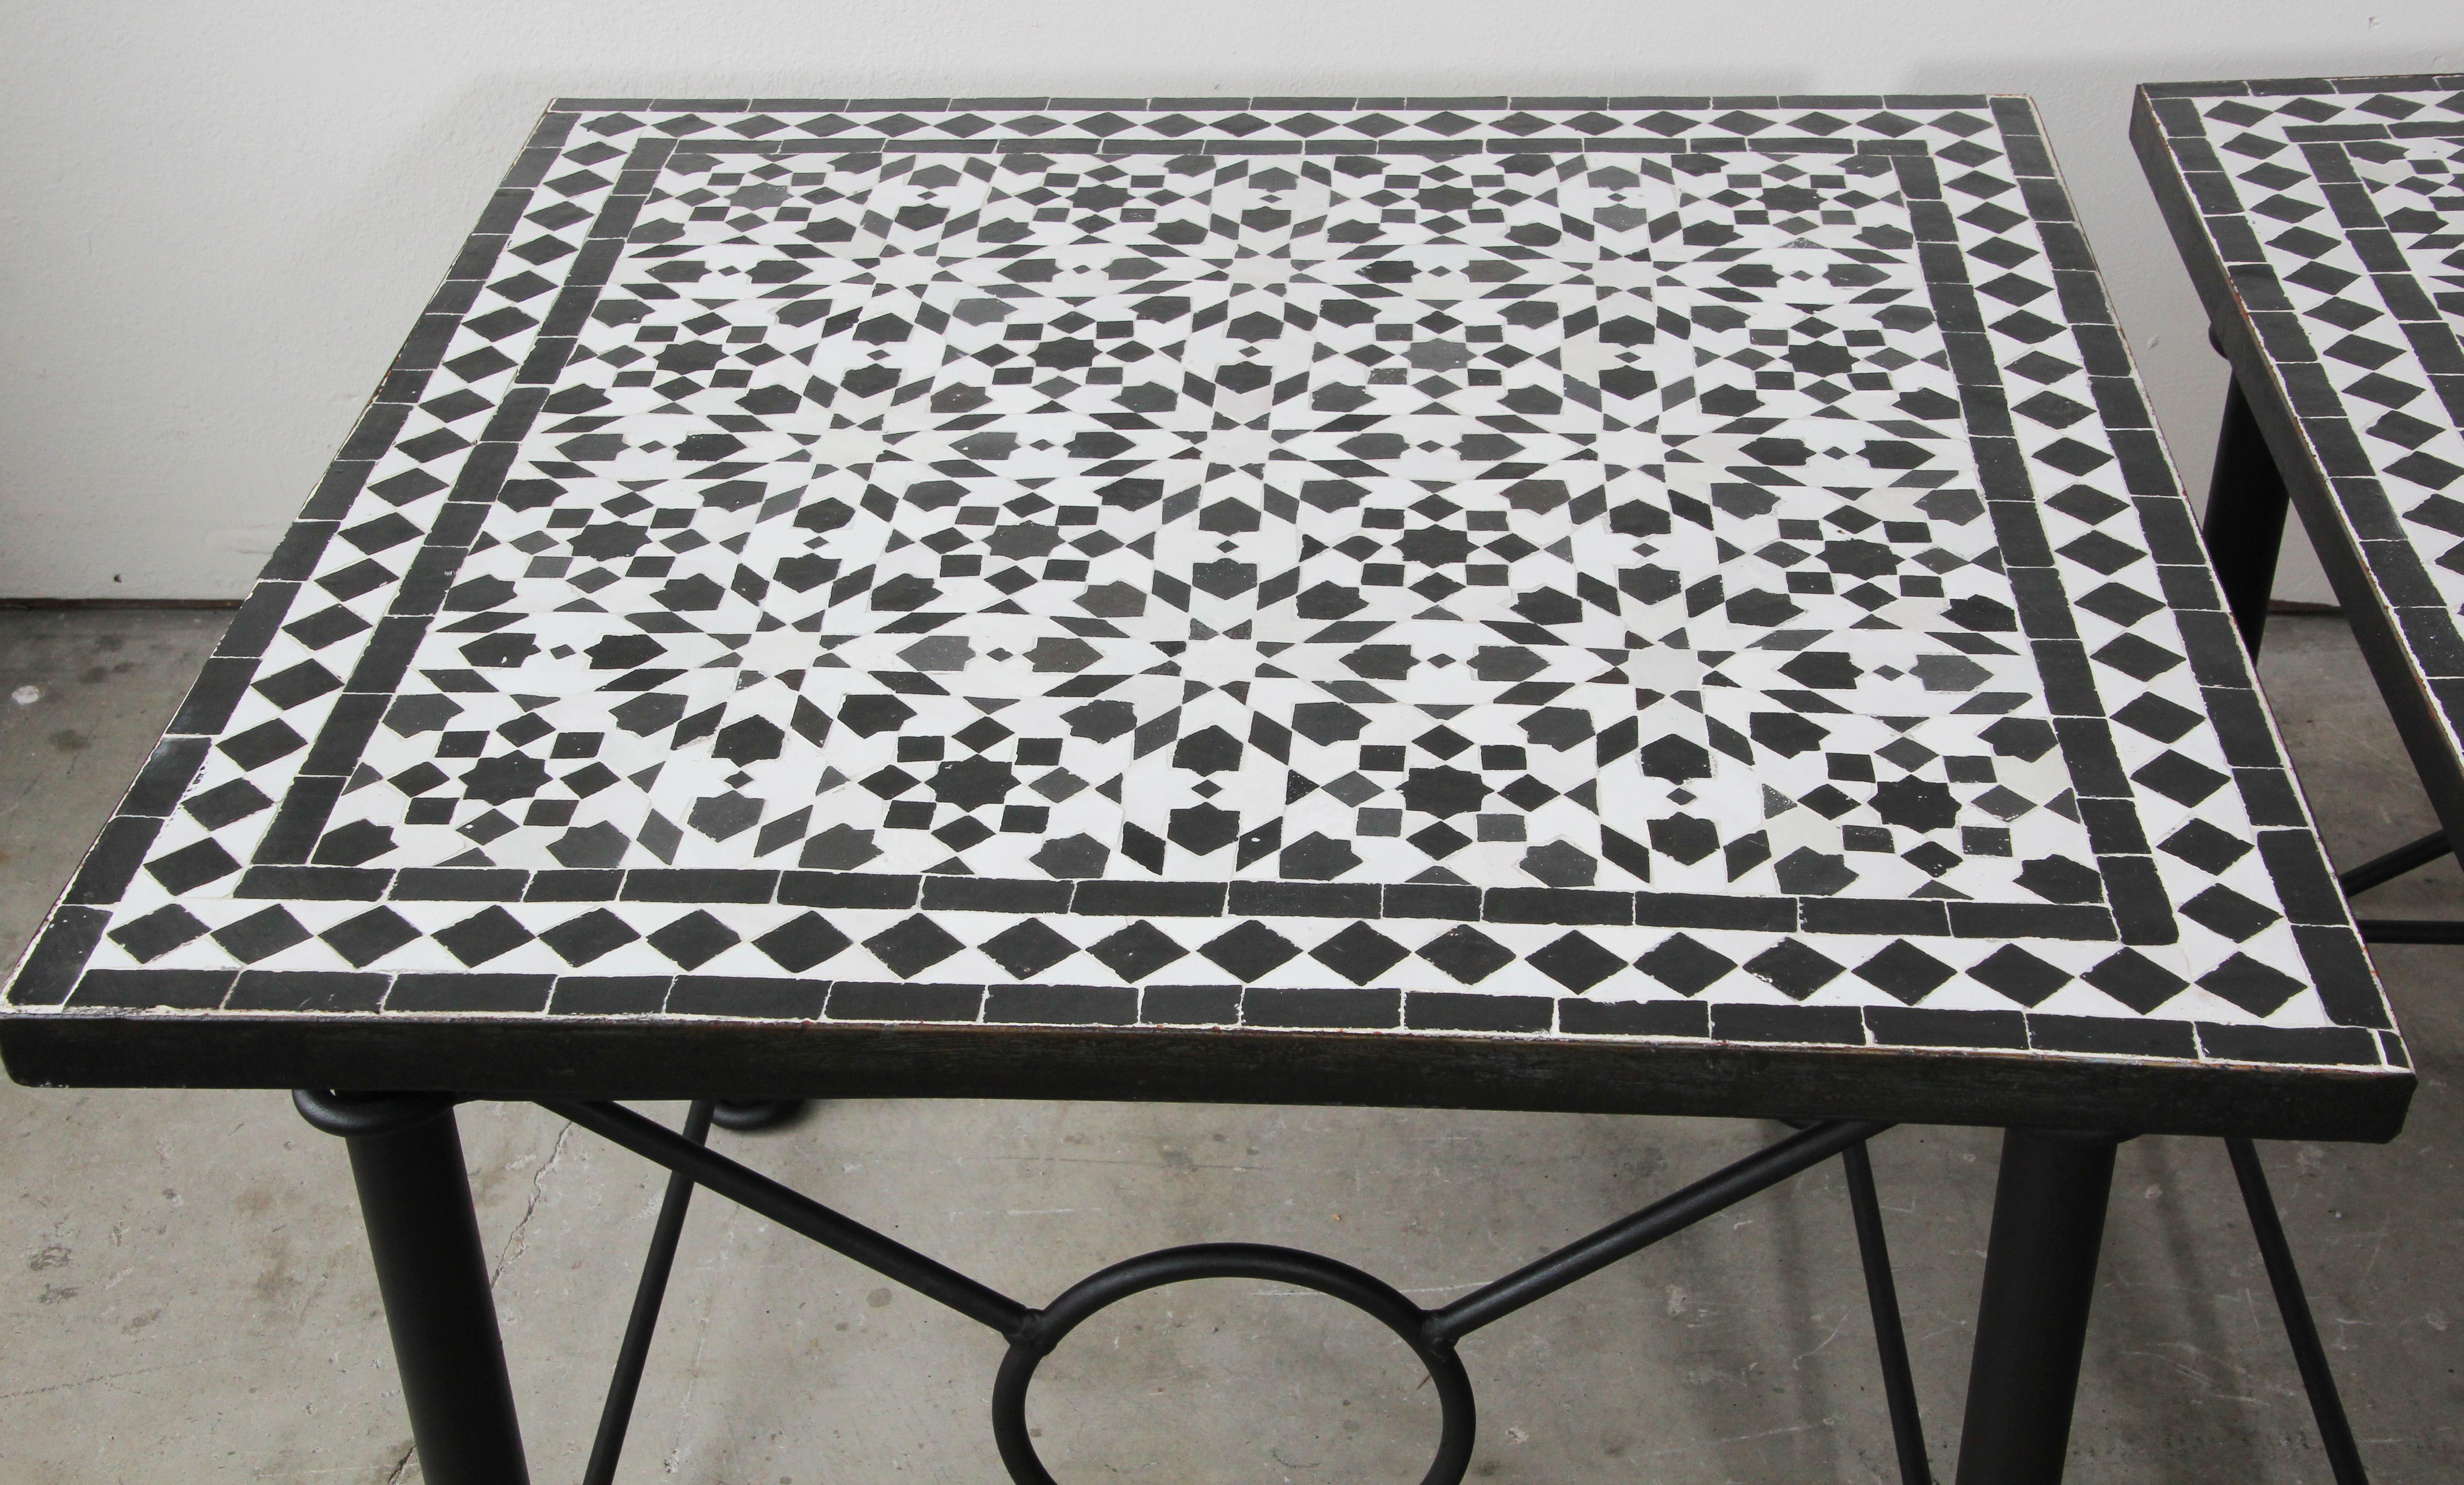 Moroccan mosaic Fez tiles side table on iron base.
Handmade by expert artisans in Fez, Morocco using reclaimed old glazed black and white colors tiles inlaid in concrete and making beautiful geometrical Moorish Fez designs, colors are black and